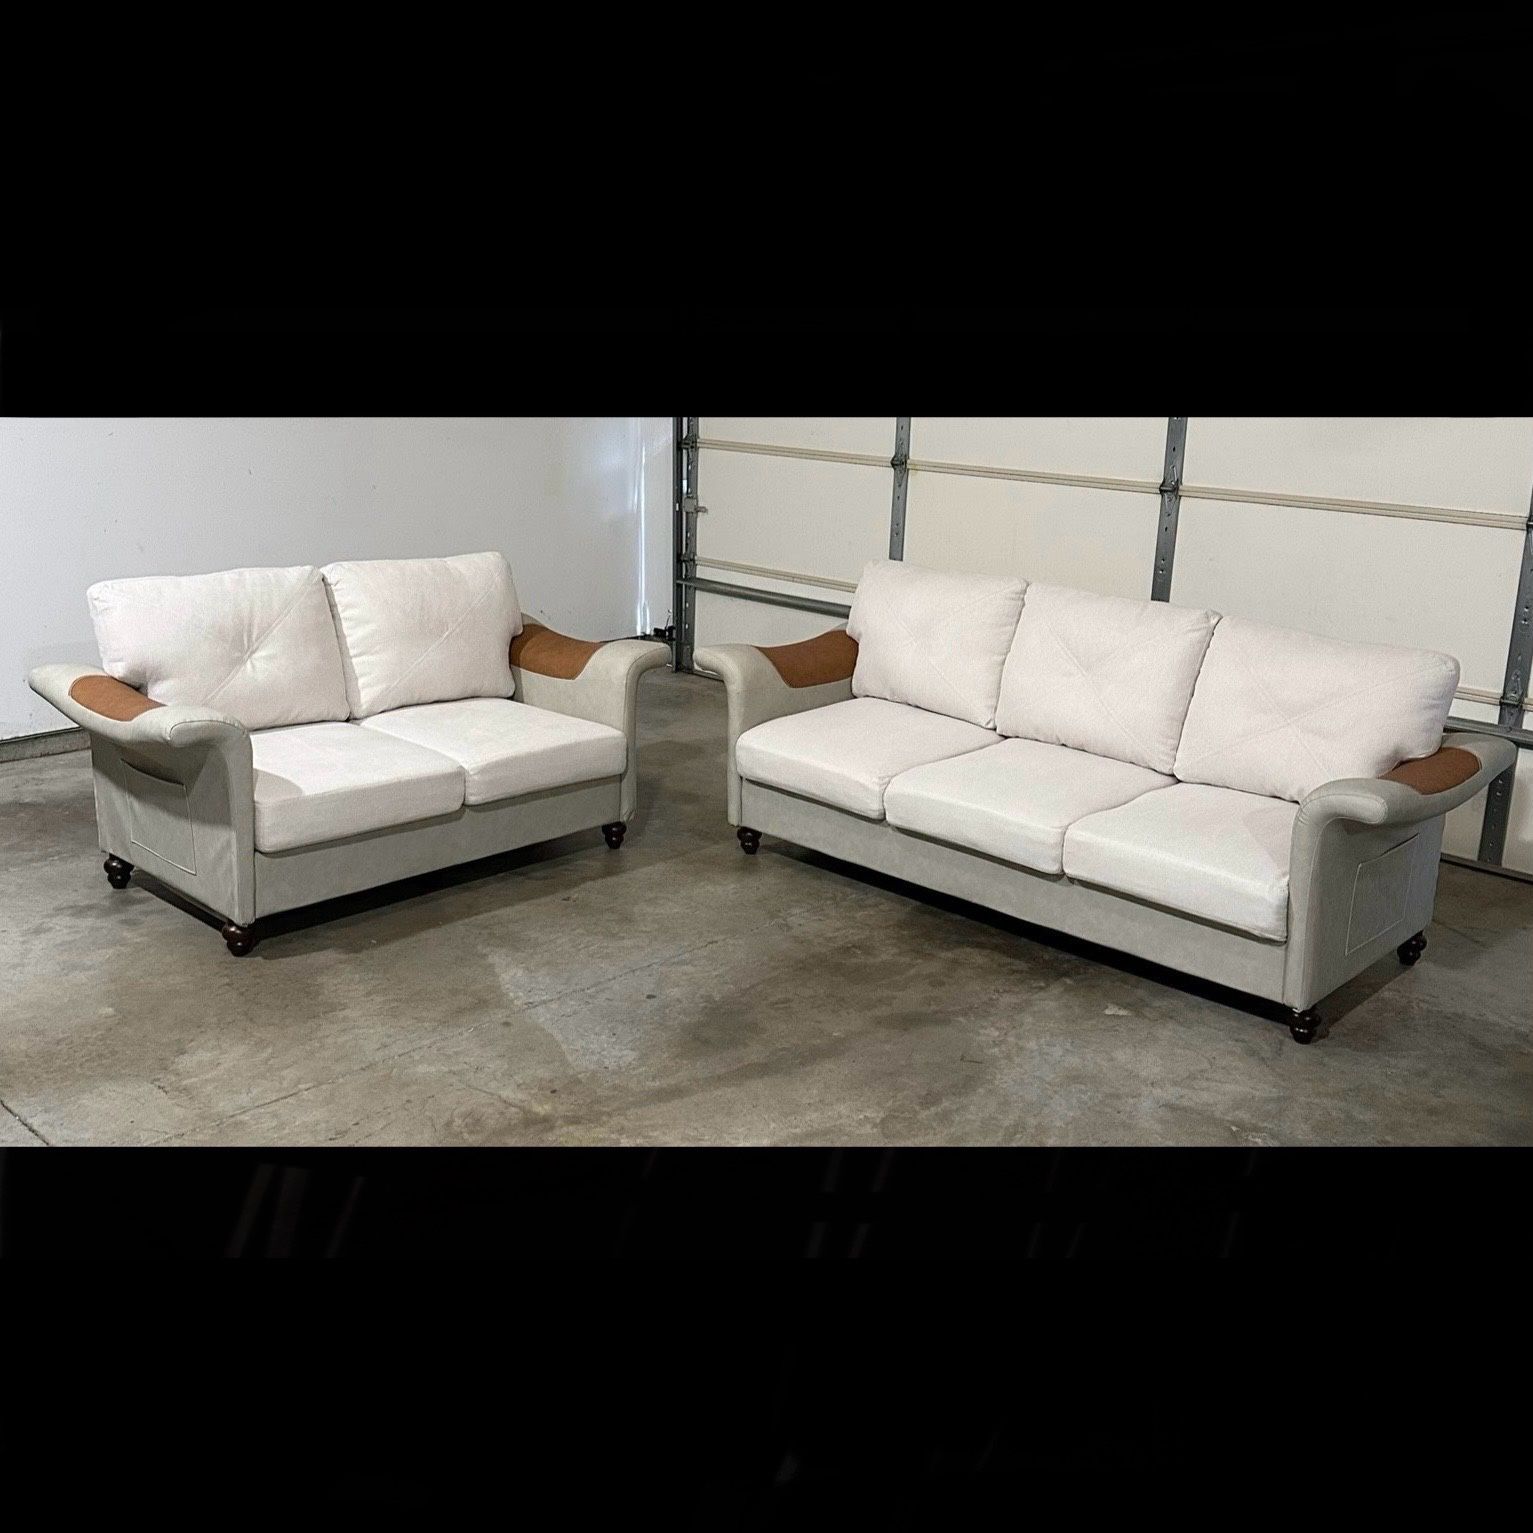 New Living Room Set - Sofa / Couch and Loveseat (Can Deliver)